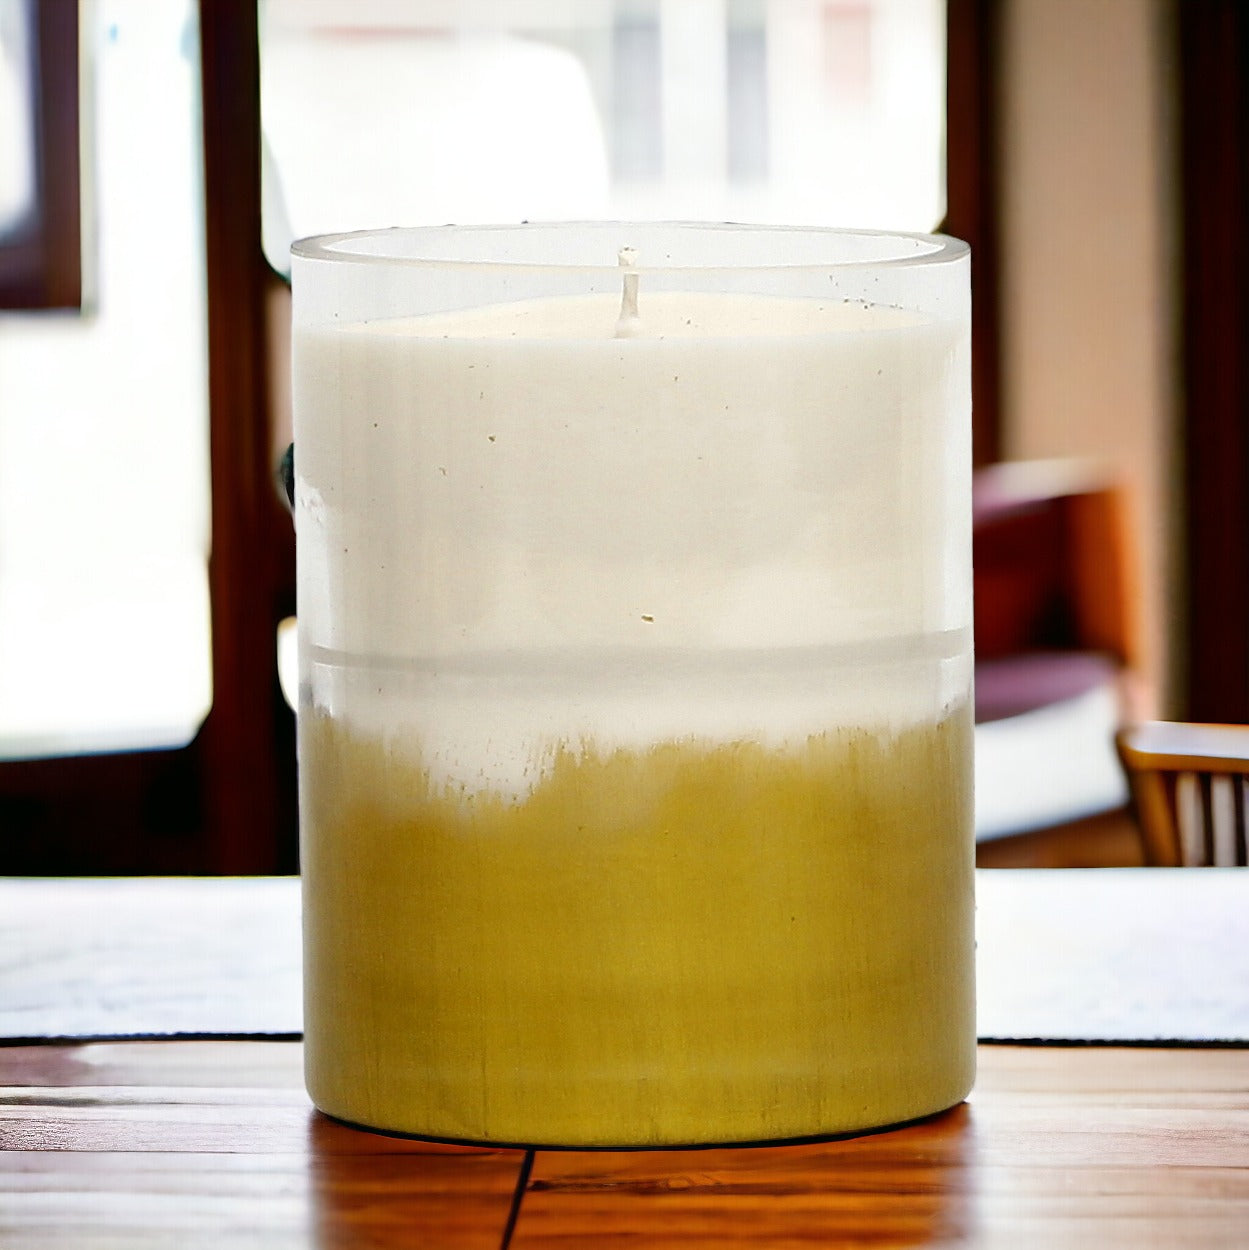 GILDED: Soy Wax Candle with hand painted gold accent. Medium round thick glass container